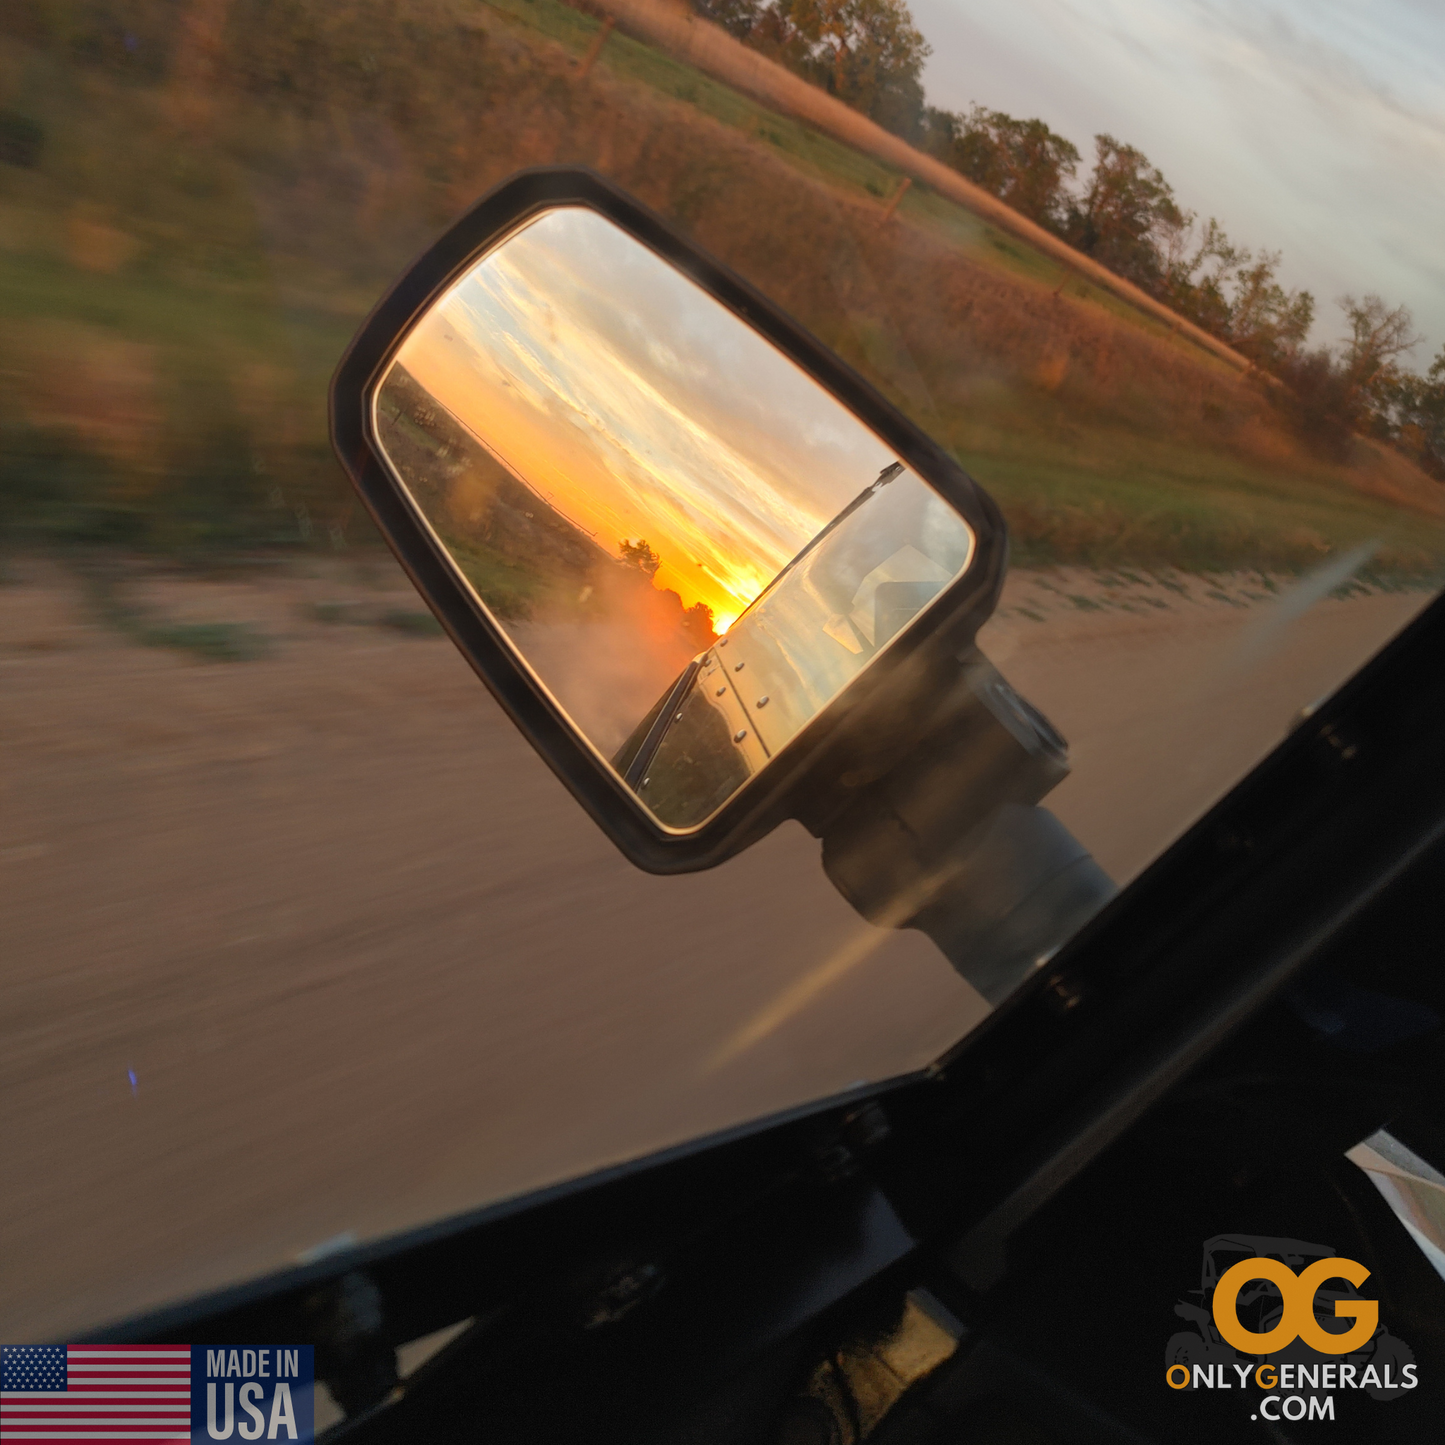 A beautiful & side shot of the OnlyGenerals SideskinsLITE hard upper doors while cruising down a gravel road with the Polaris General